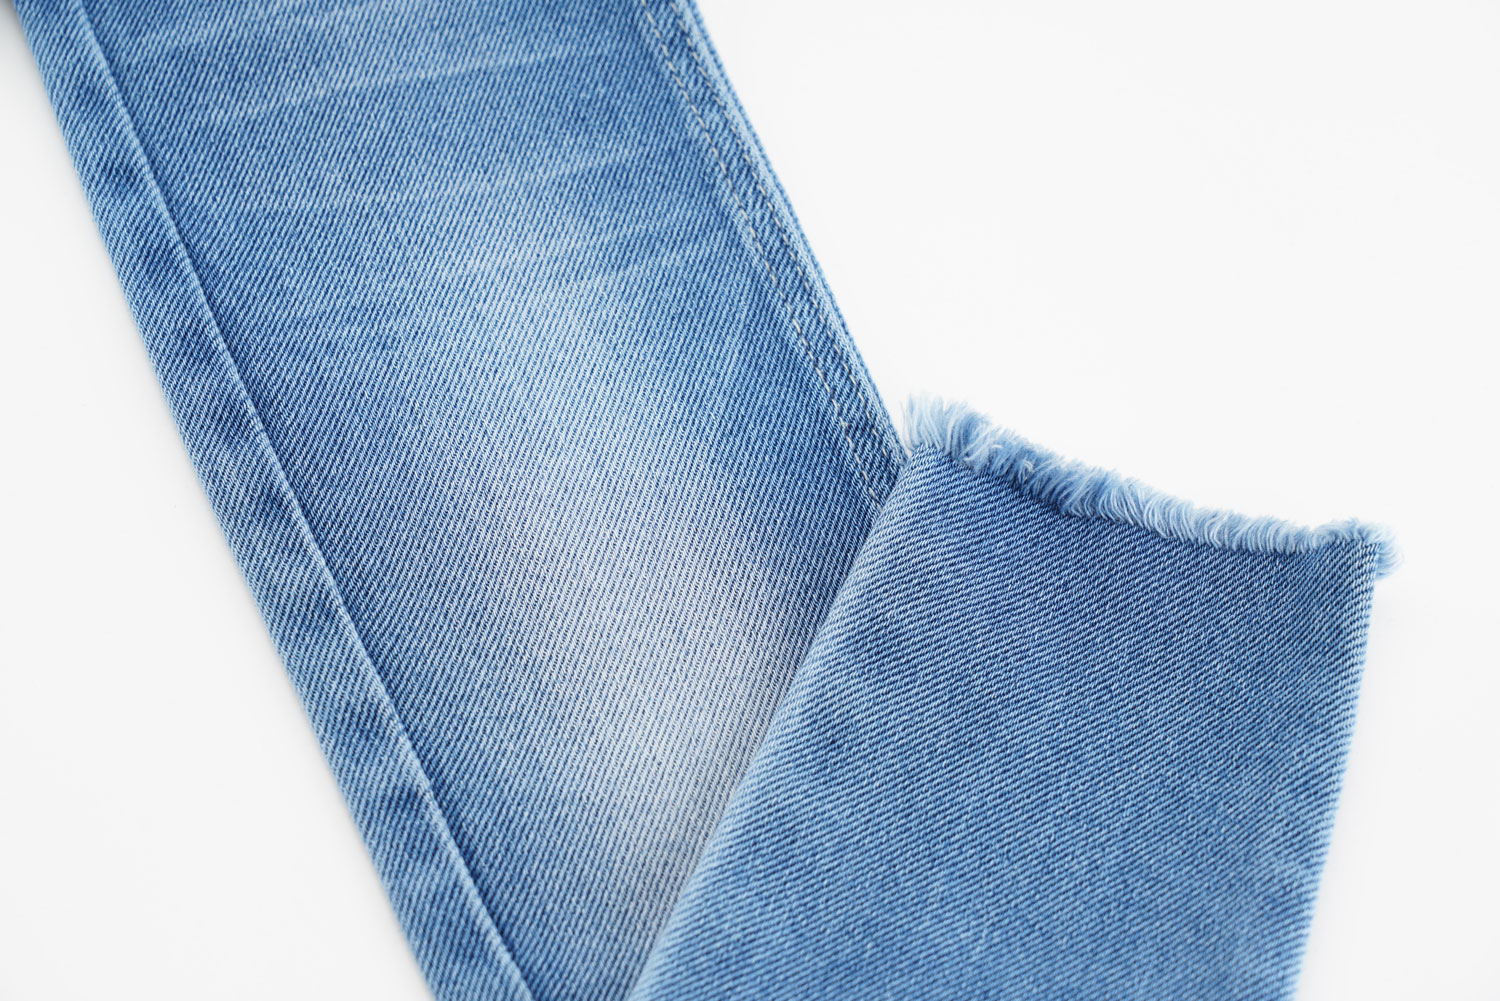 Denim Fabric: What Are the Features? 1